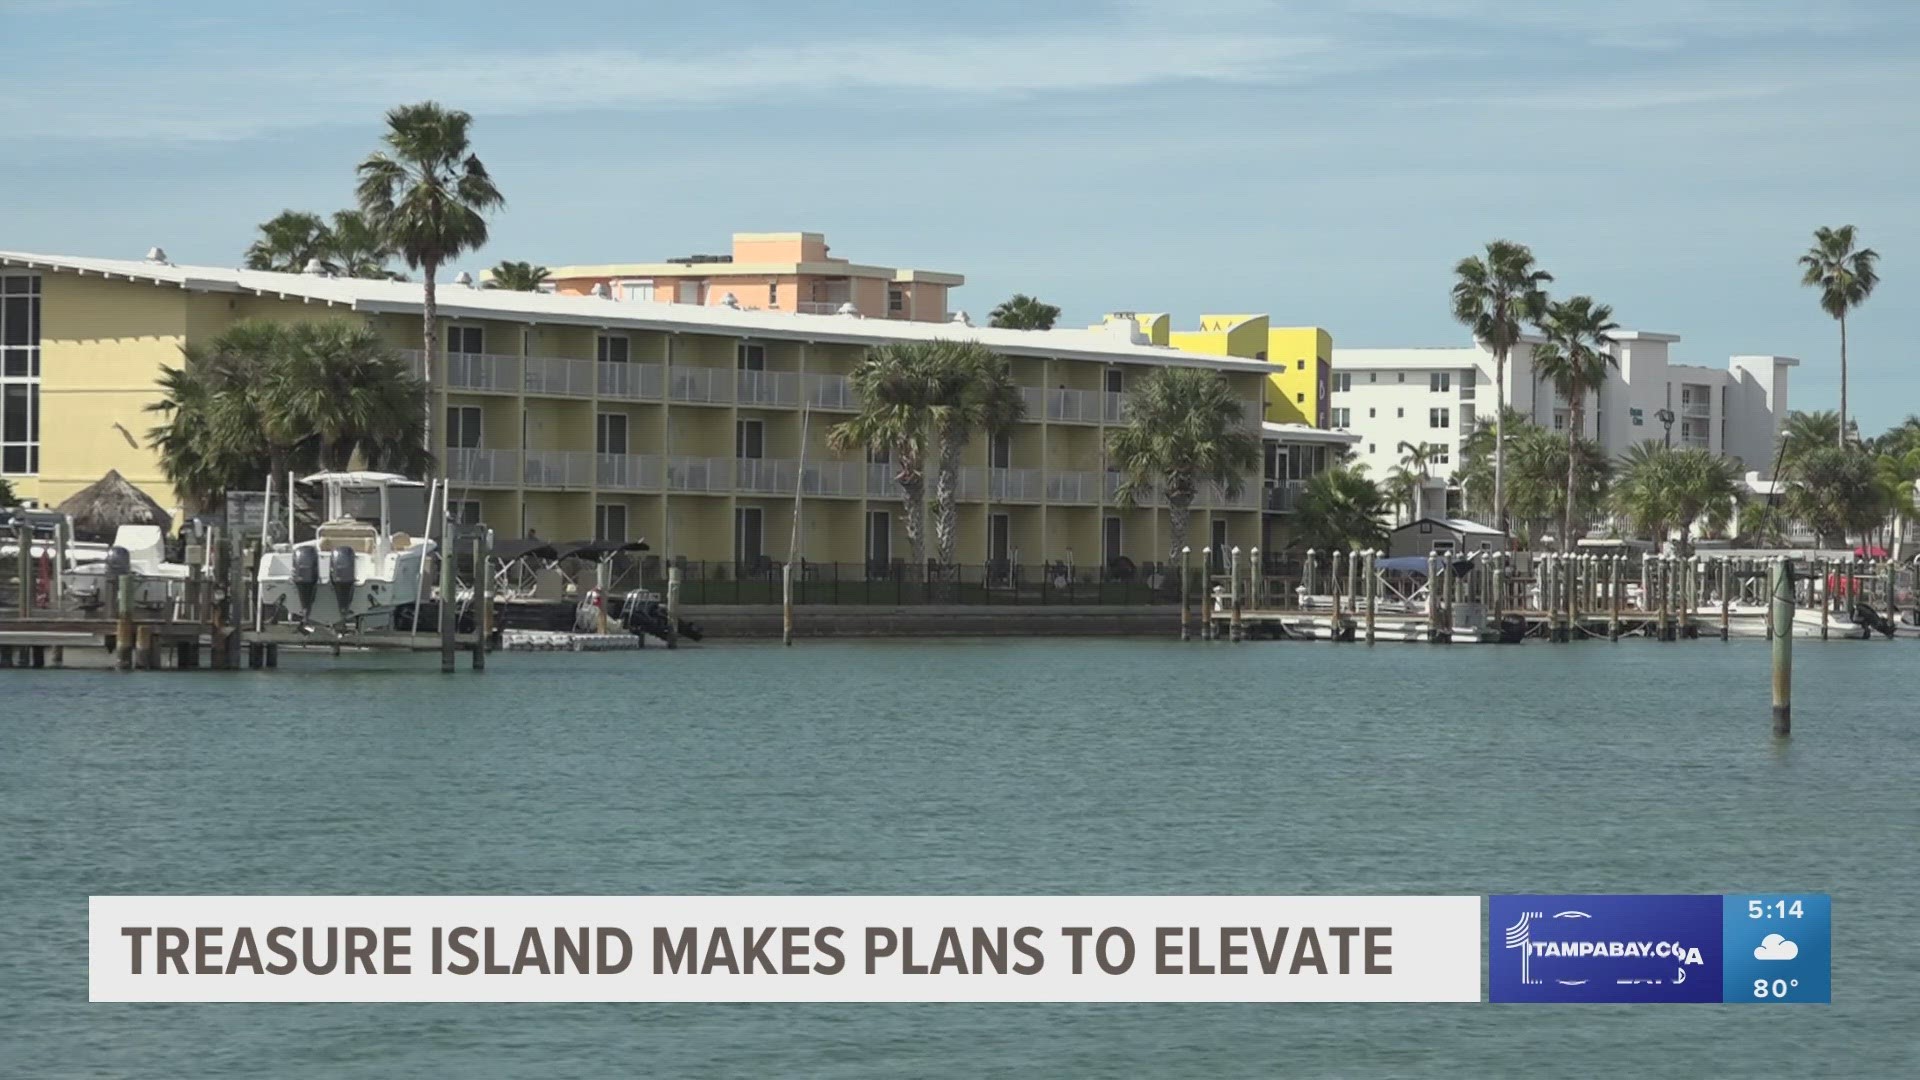 The city of Treasure Island has a new plan to elevate the entire island to protect it from rising sea levels.